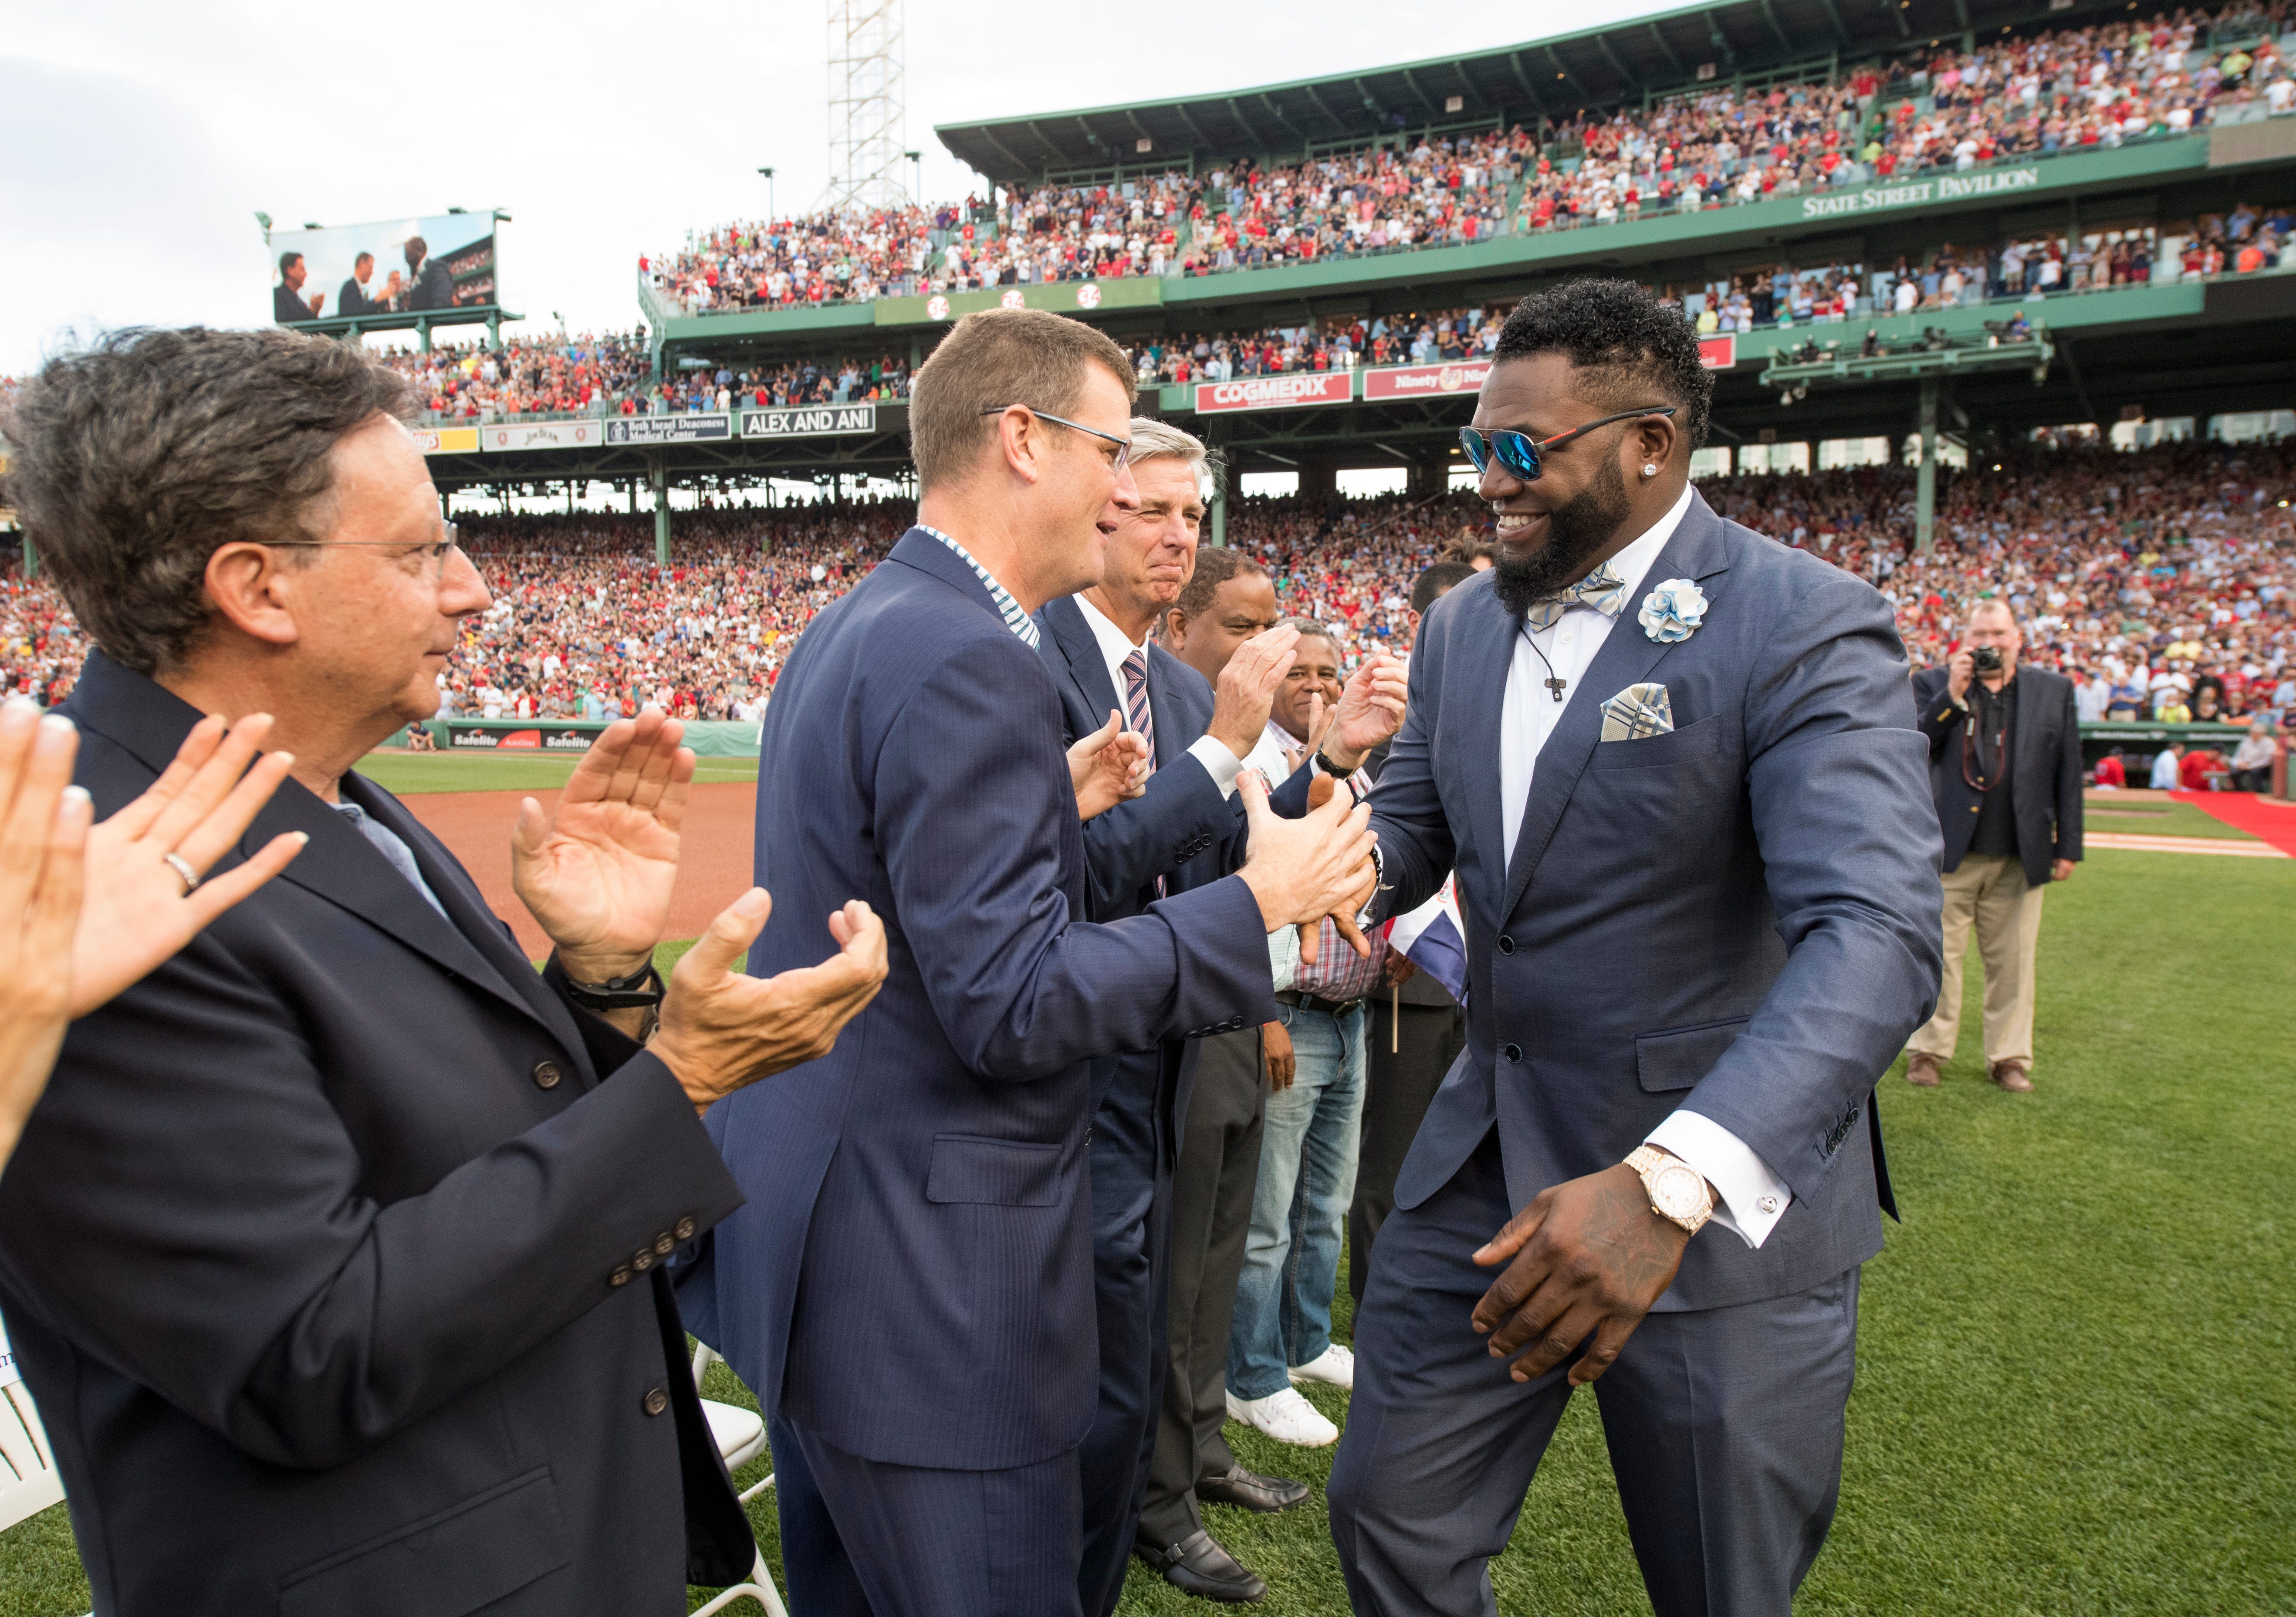 As David Ortiz's Number Is Retired, Here Are 34 Big Papi Facts – Hartford  Courant